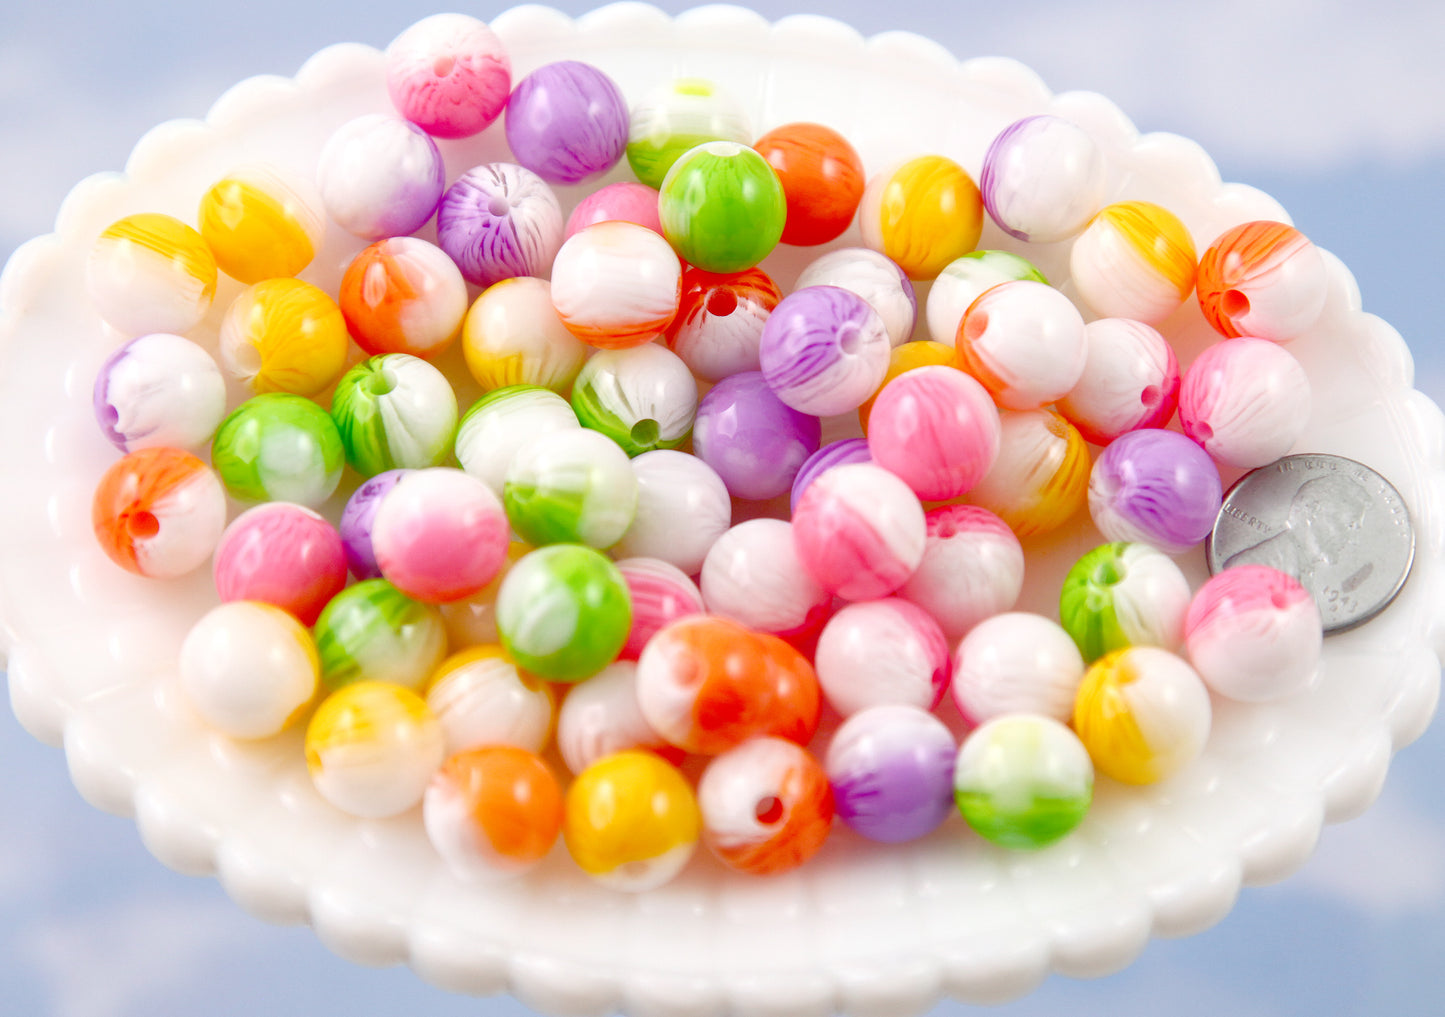 Cute Resin Beads - 12mm Pastel Candy Two Tone Marble Stripe Acrylic or Resin Beads - mixed color, small size beads - 50 pcs set